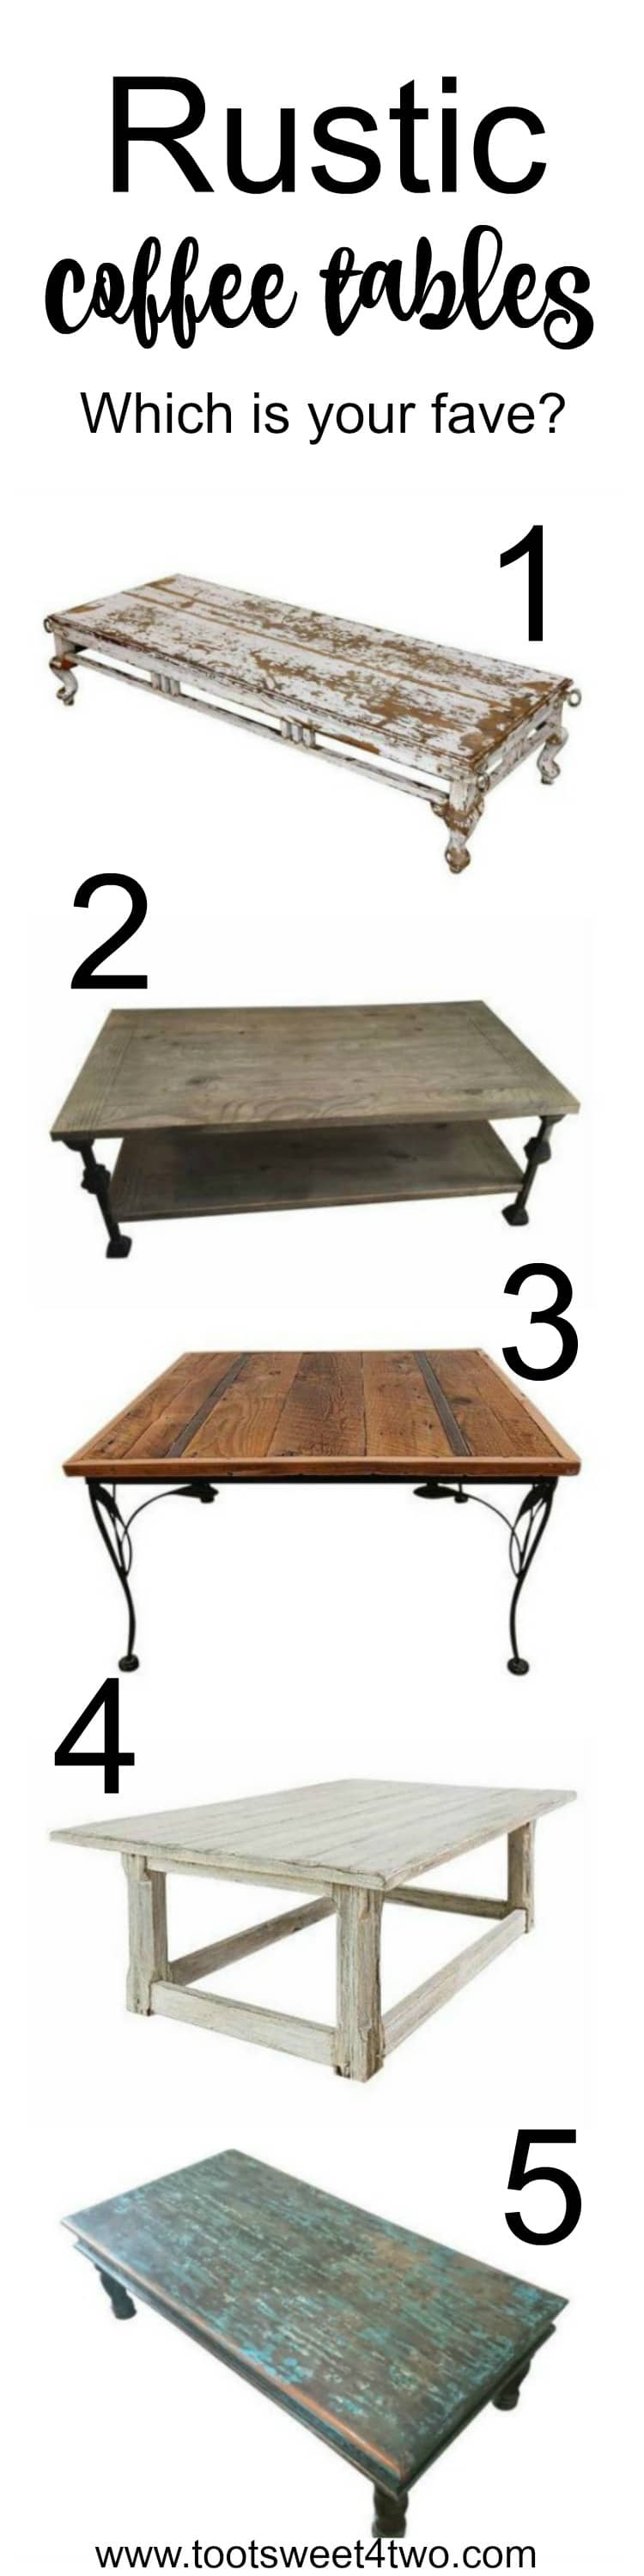 Are you searching for the perfect rustic coffee table? One with some age, a weathered masterpiece of coffee table perfection? Here are a few ideas for distressed, industrial, rustic, shabby chic and unique coffee tables. | www.tootsweet4two.com